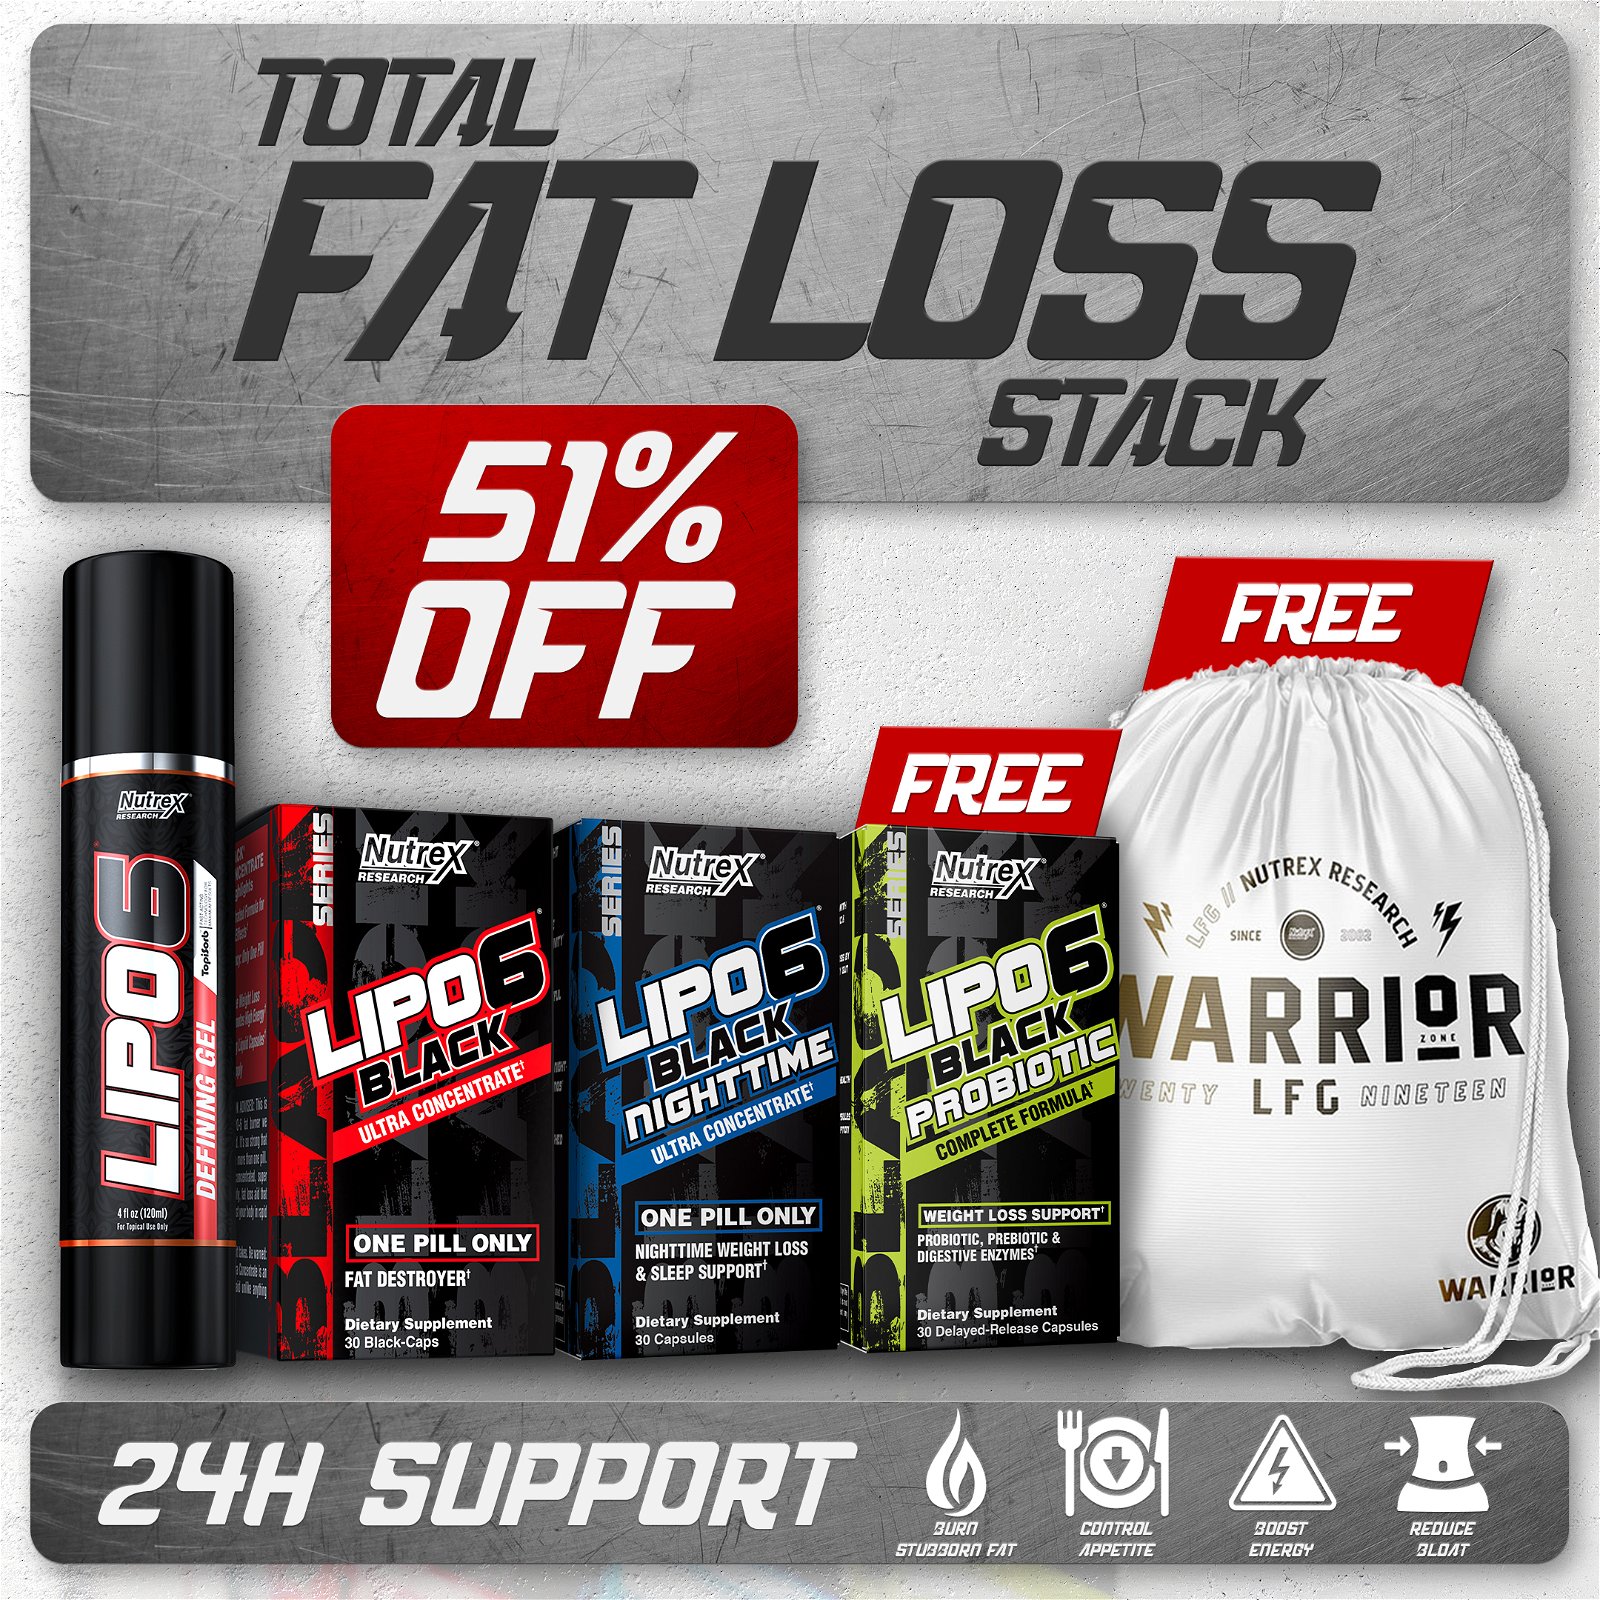 51% Off total fat loss stack